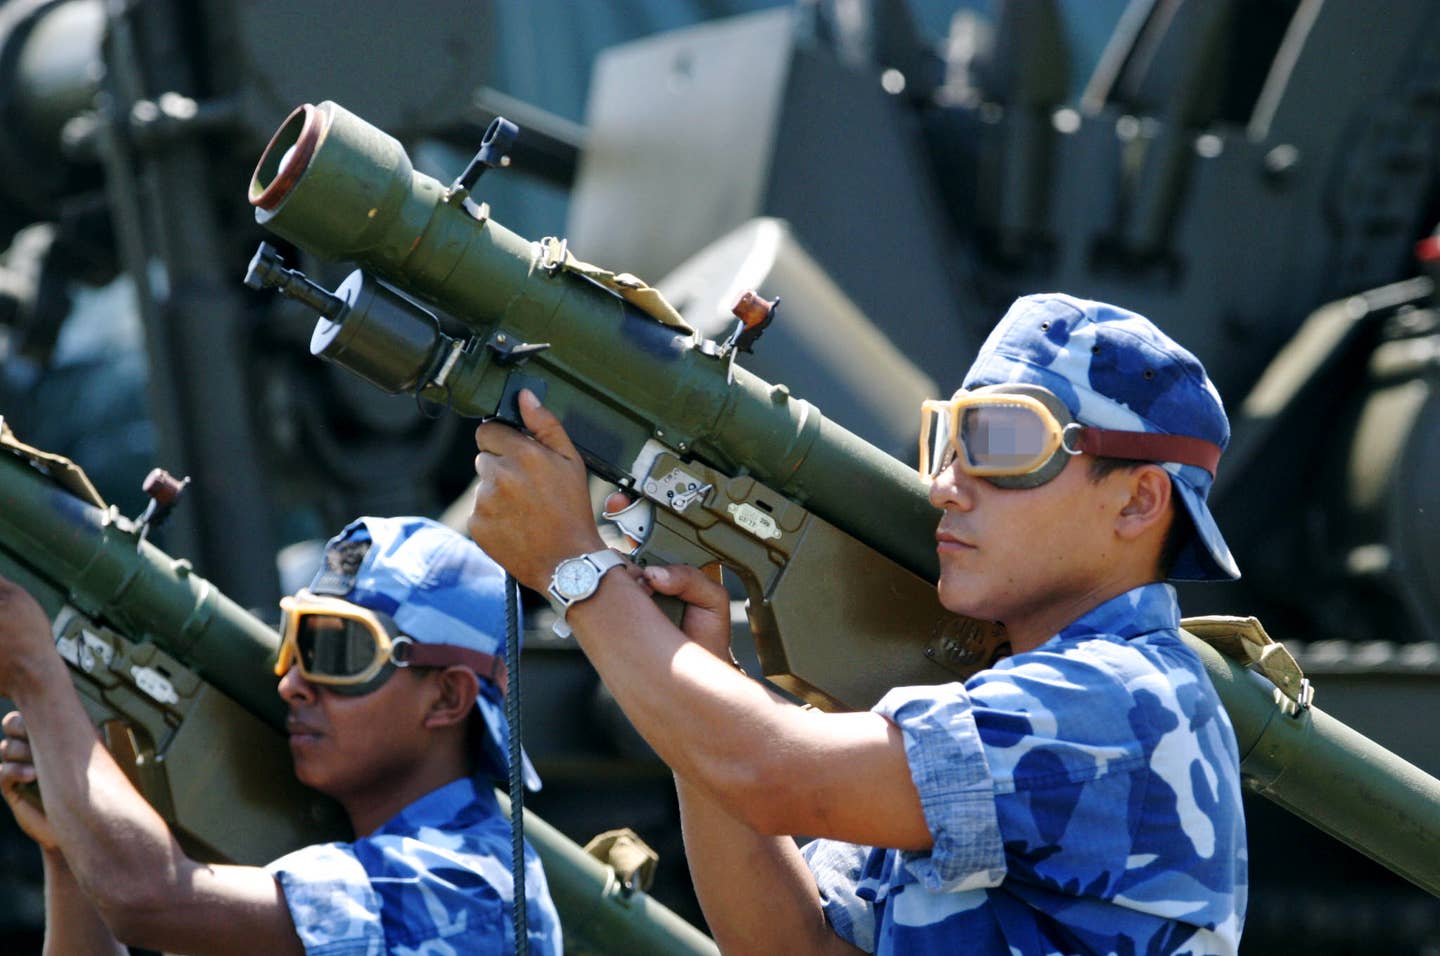 Soviet-era MANPADS like these SA-7s seen here in Nicaragua in 2003, continue to make up the biggest percentage of such illicit arms. (MIGUEL ALVAREZ/AFP via Getty Images)